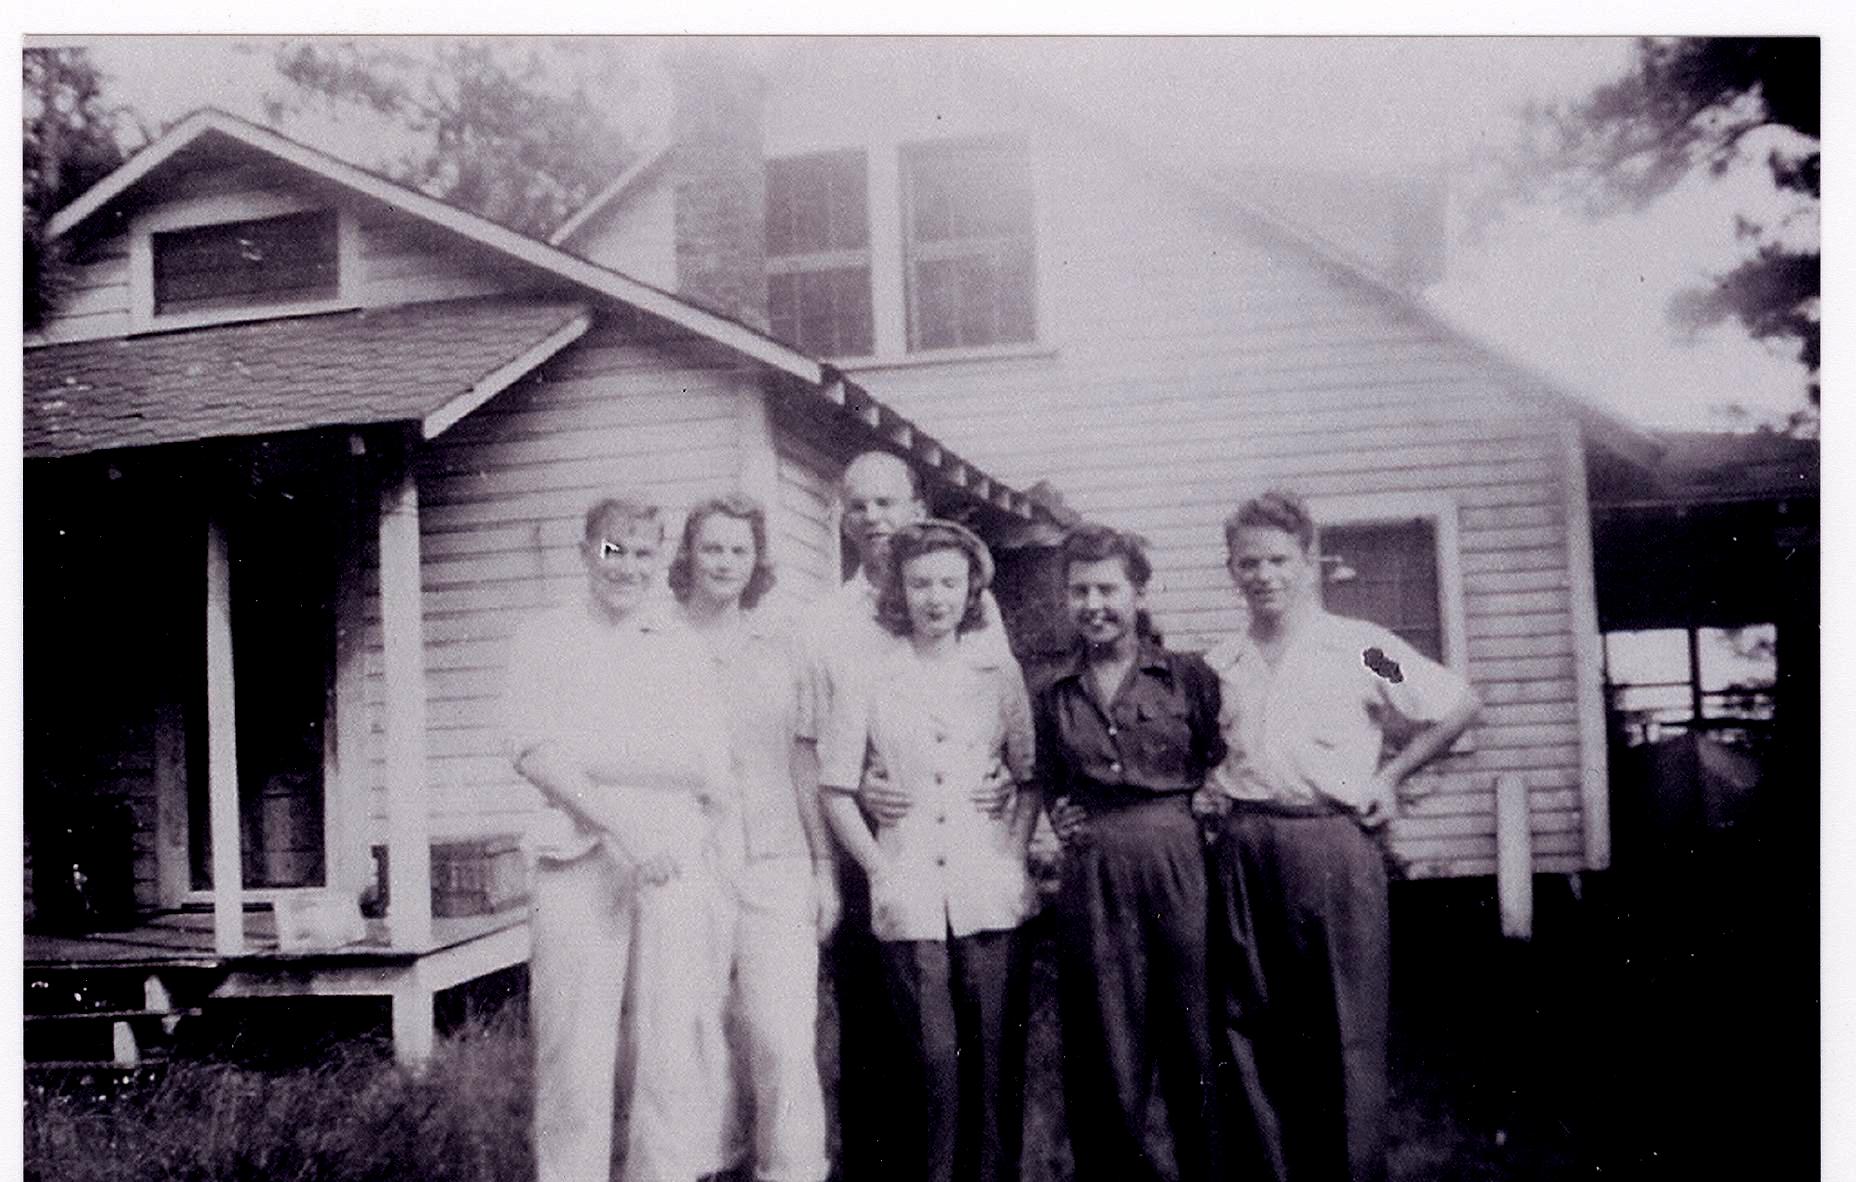 House party of cousins: Fairey, Guess and Straits.... mid 1940's